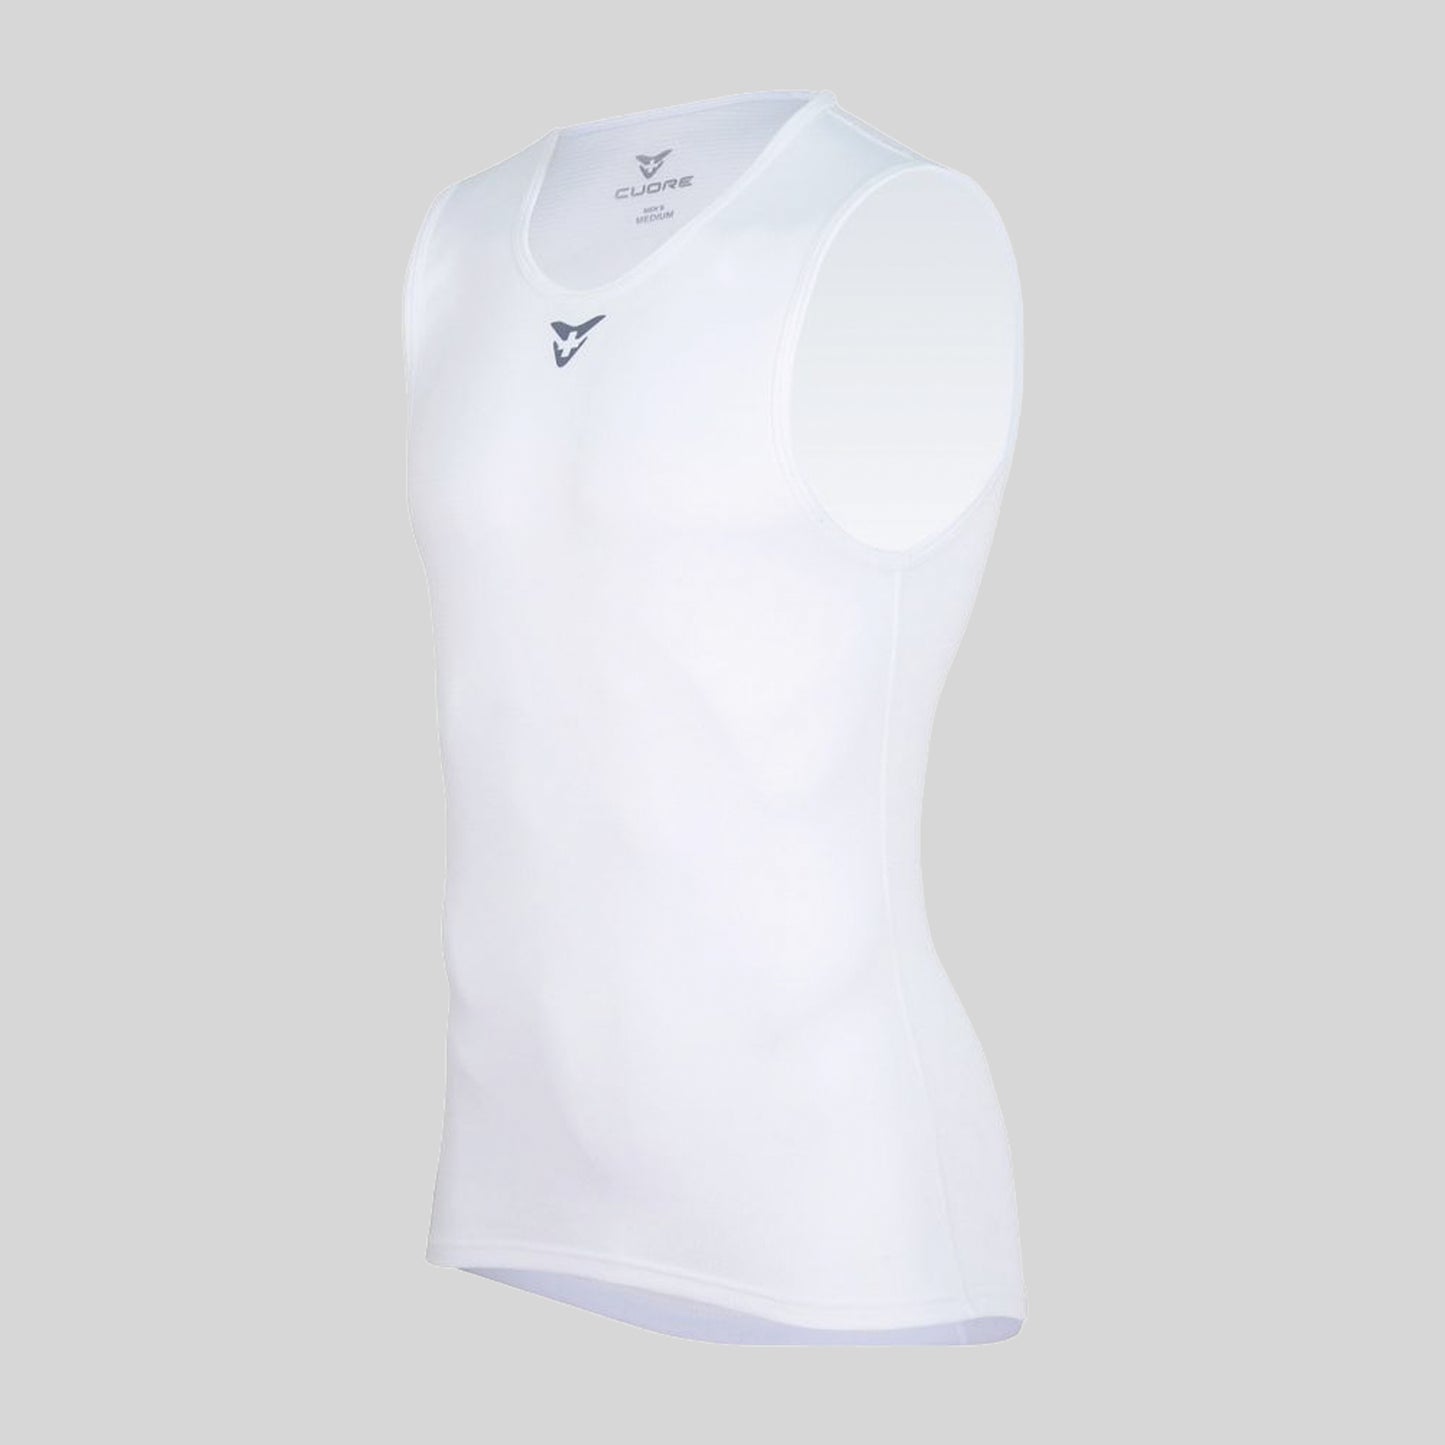 Sleeveless Baselayer White by Cuore of Switzerland for Ascender Cycling Club Zürich Switzerland Front View